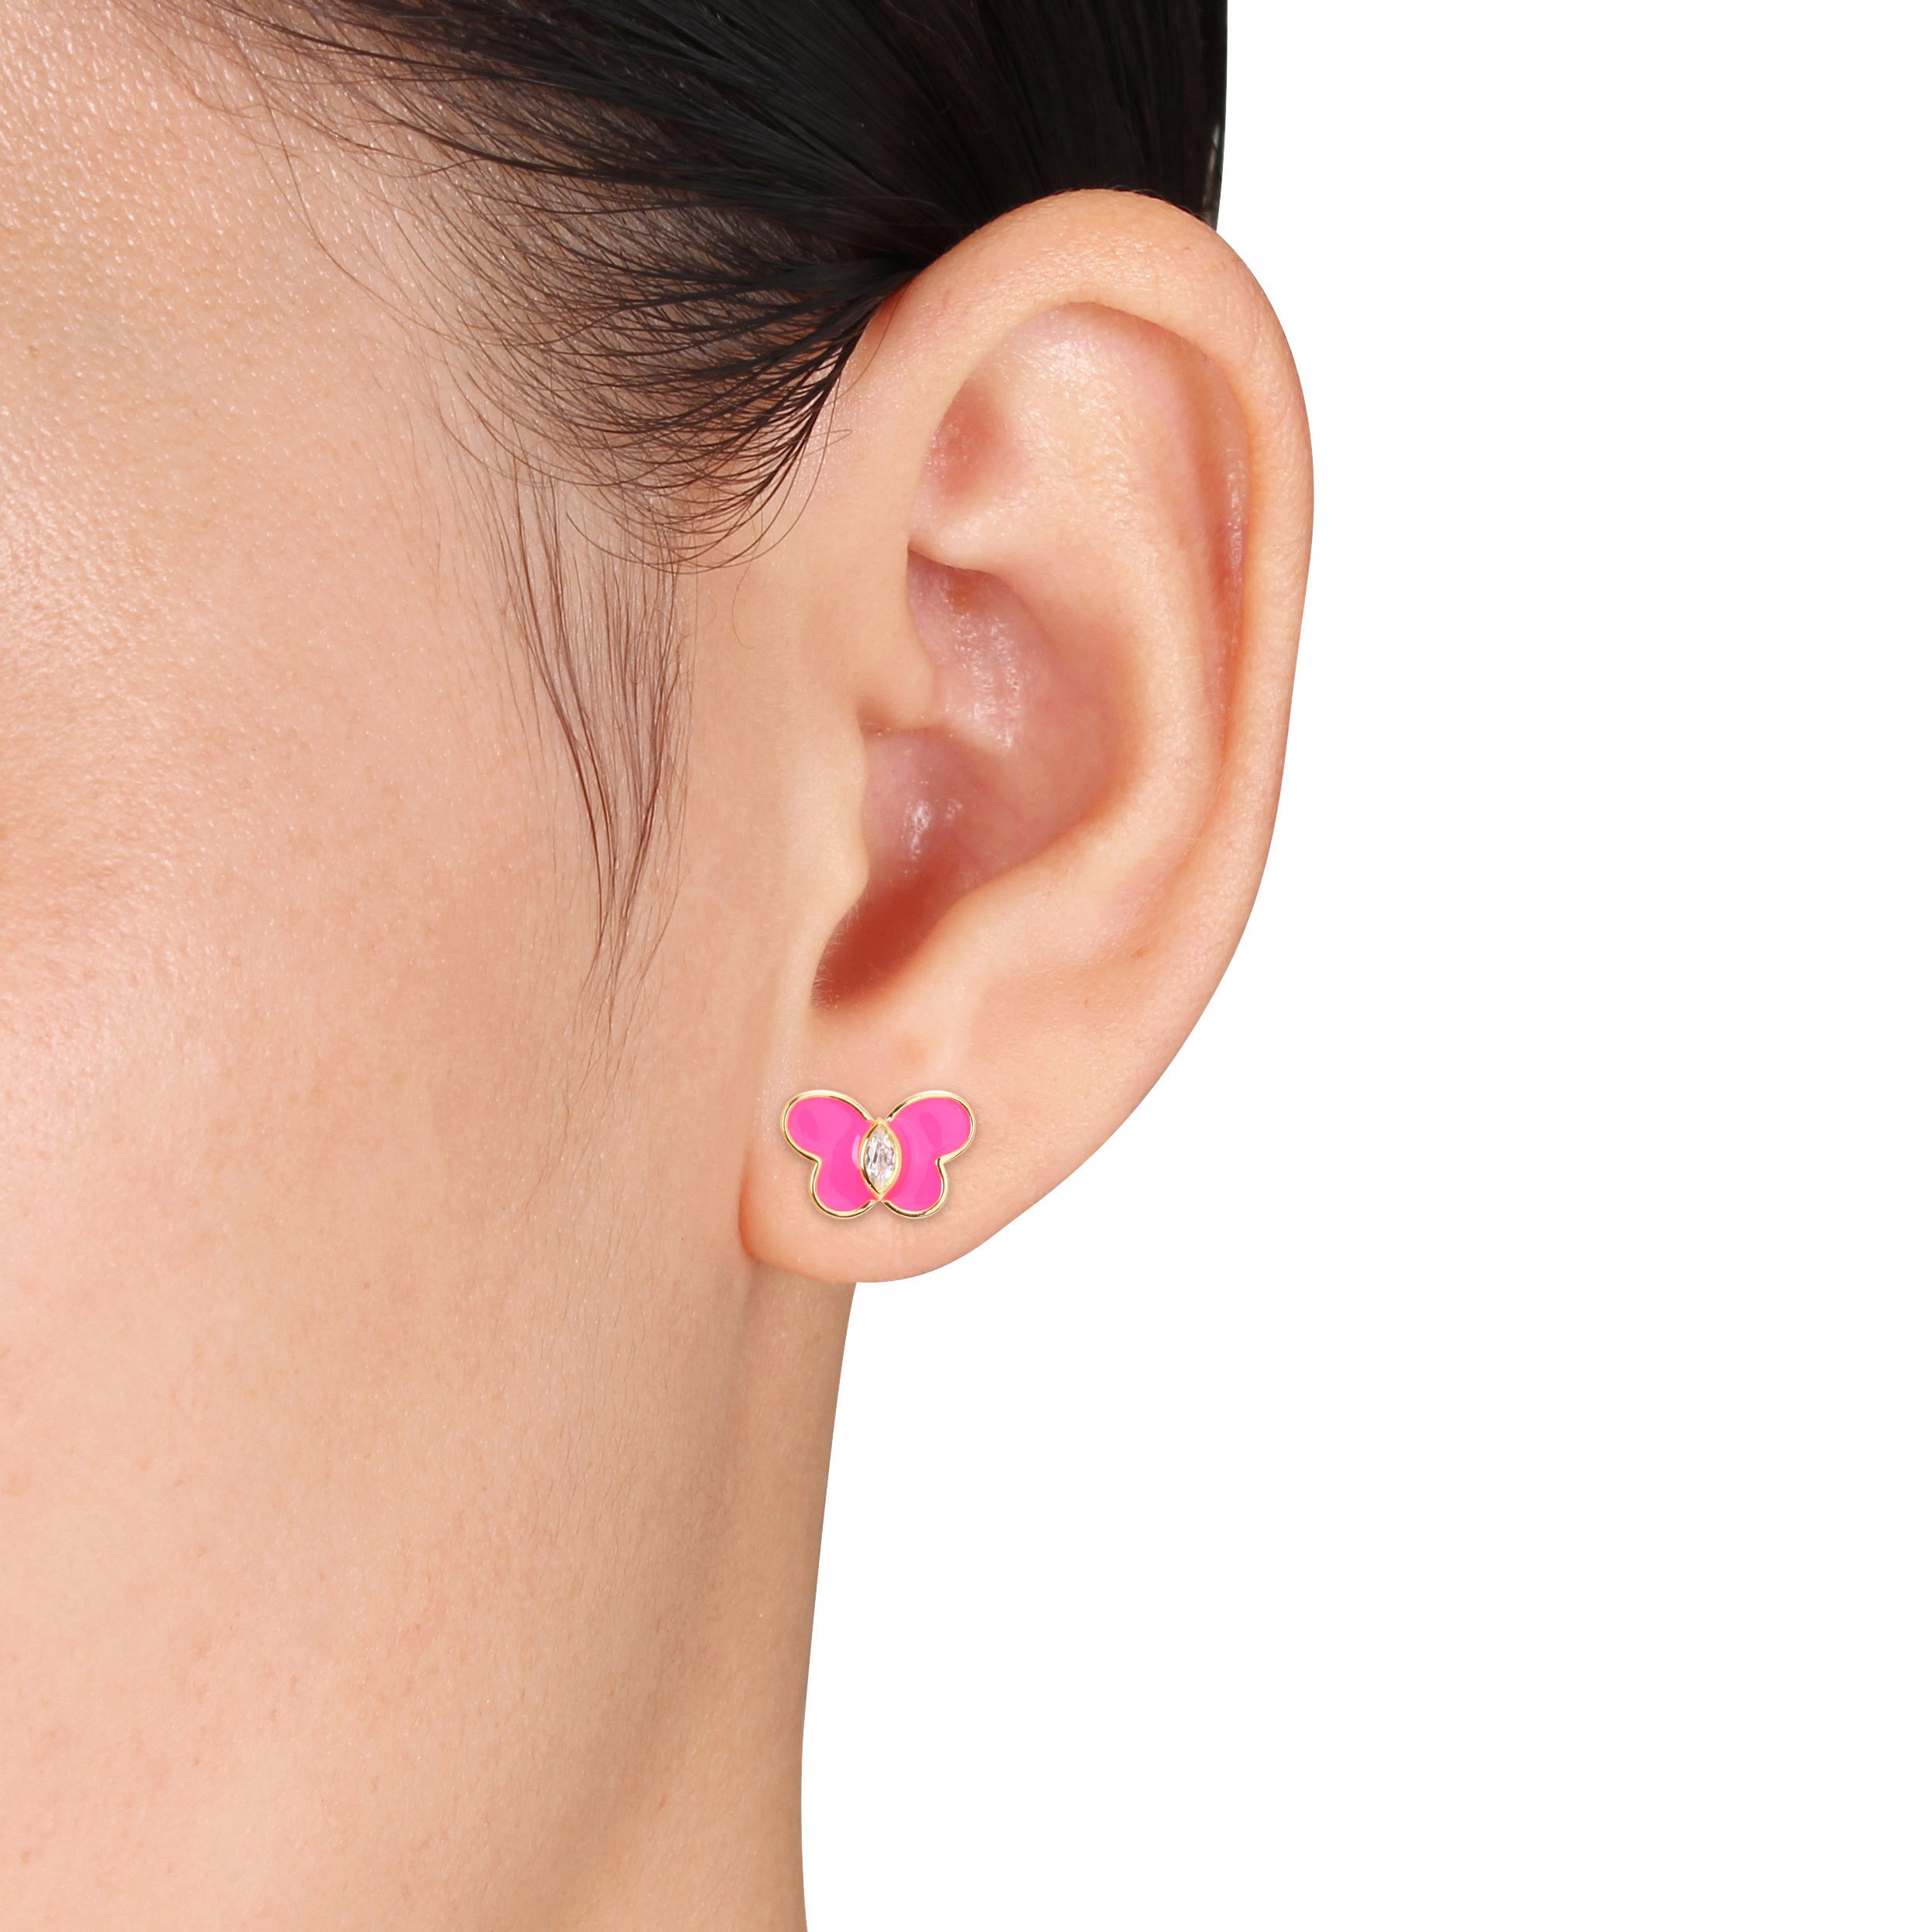 1/4 CT TGW Created White Sapphire Butterfly Pink Enamel Stud Earrings in Yellow Plated Sterling Silver